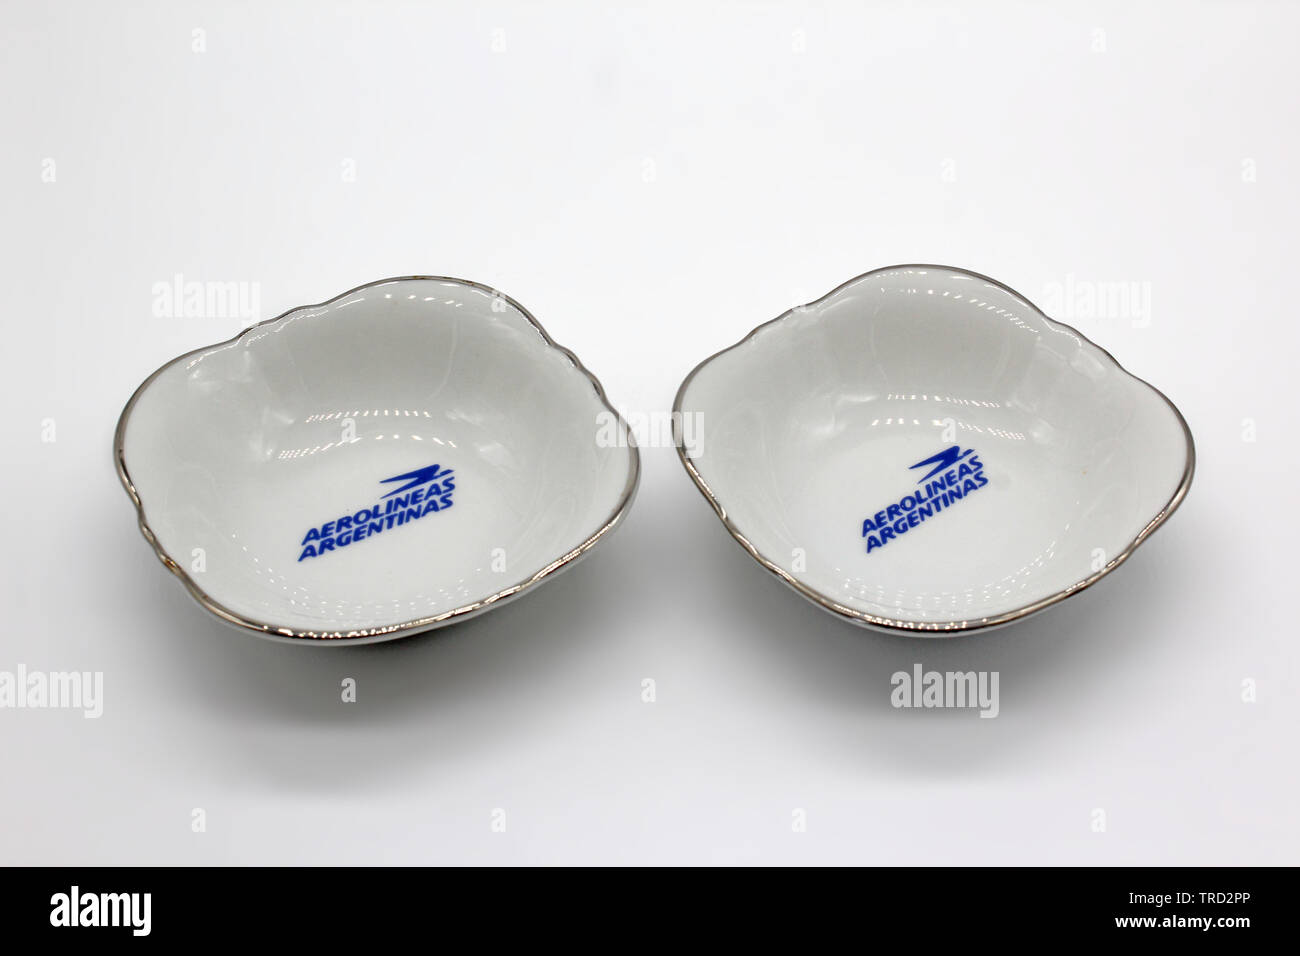 Aerolineas Argentinas porcelain plates with logo printed, isolated on a white background Stock Photo